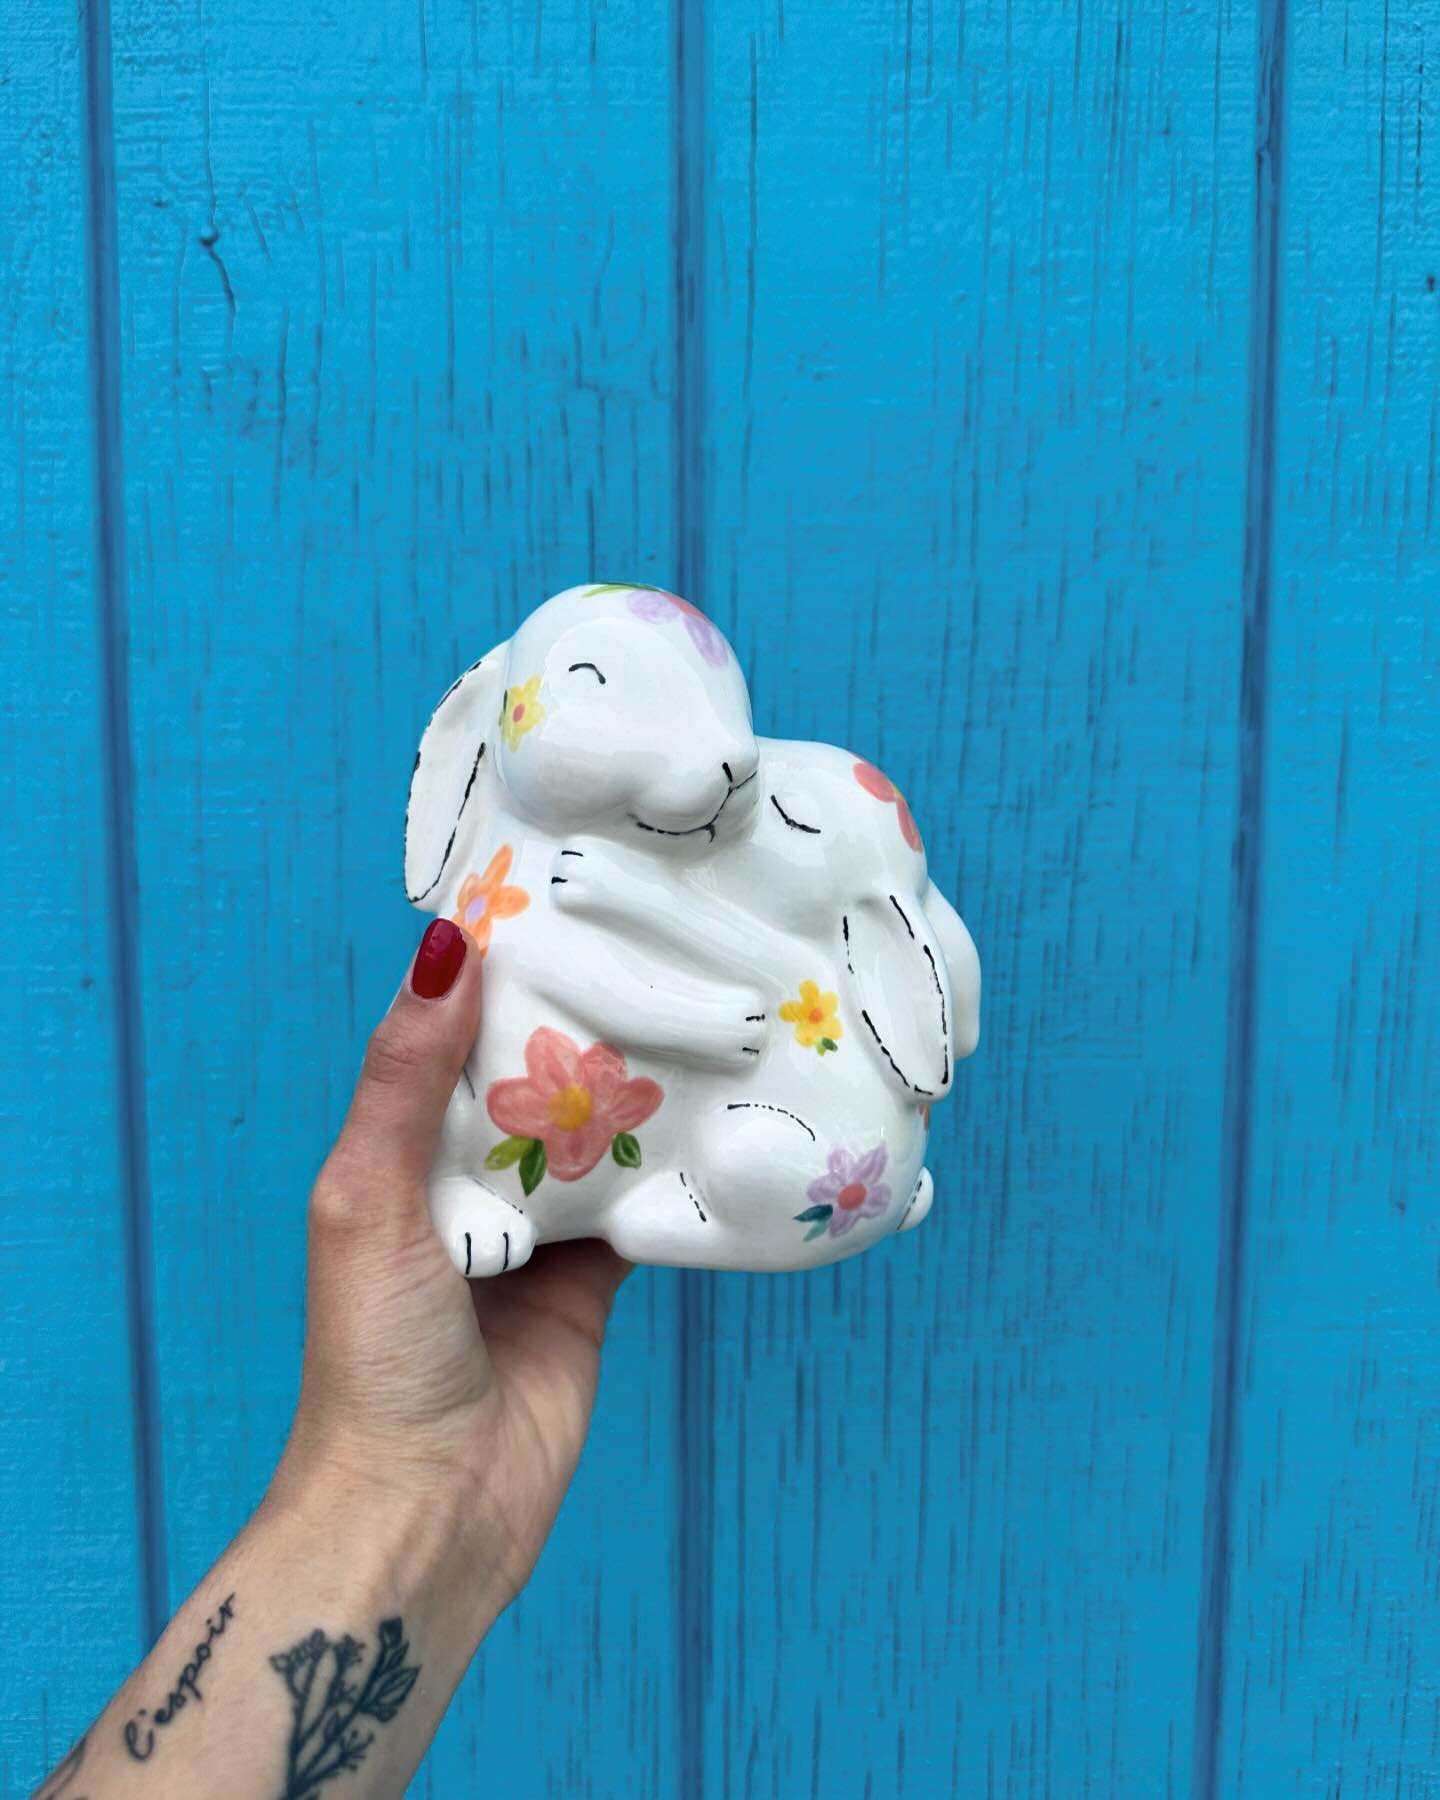 Here are some pottery ideas for Mother&rsquo;s Day gifts! 💐

Remember!!! Mother&rsquo;s Day is coming up and the last day to paint pottery have it ready BEFORE Mother&rsquo;s Day is April 30th-May 1st !! Get them done soon! 

| family friendly art s